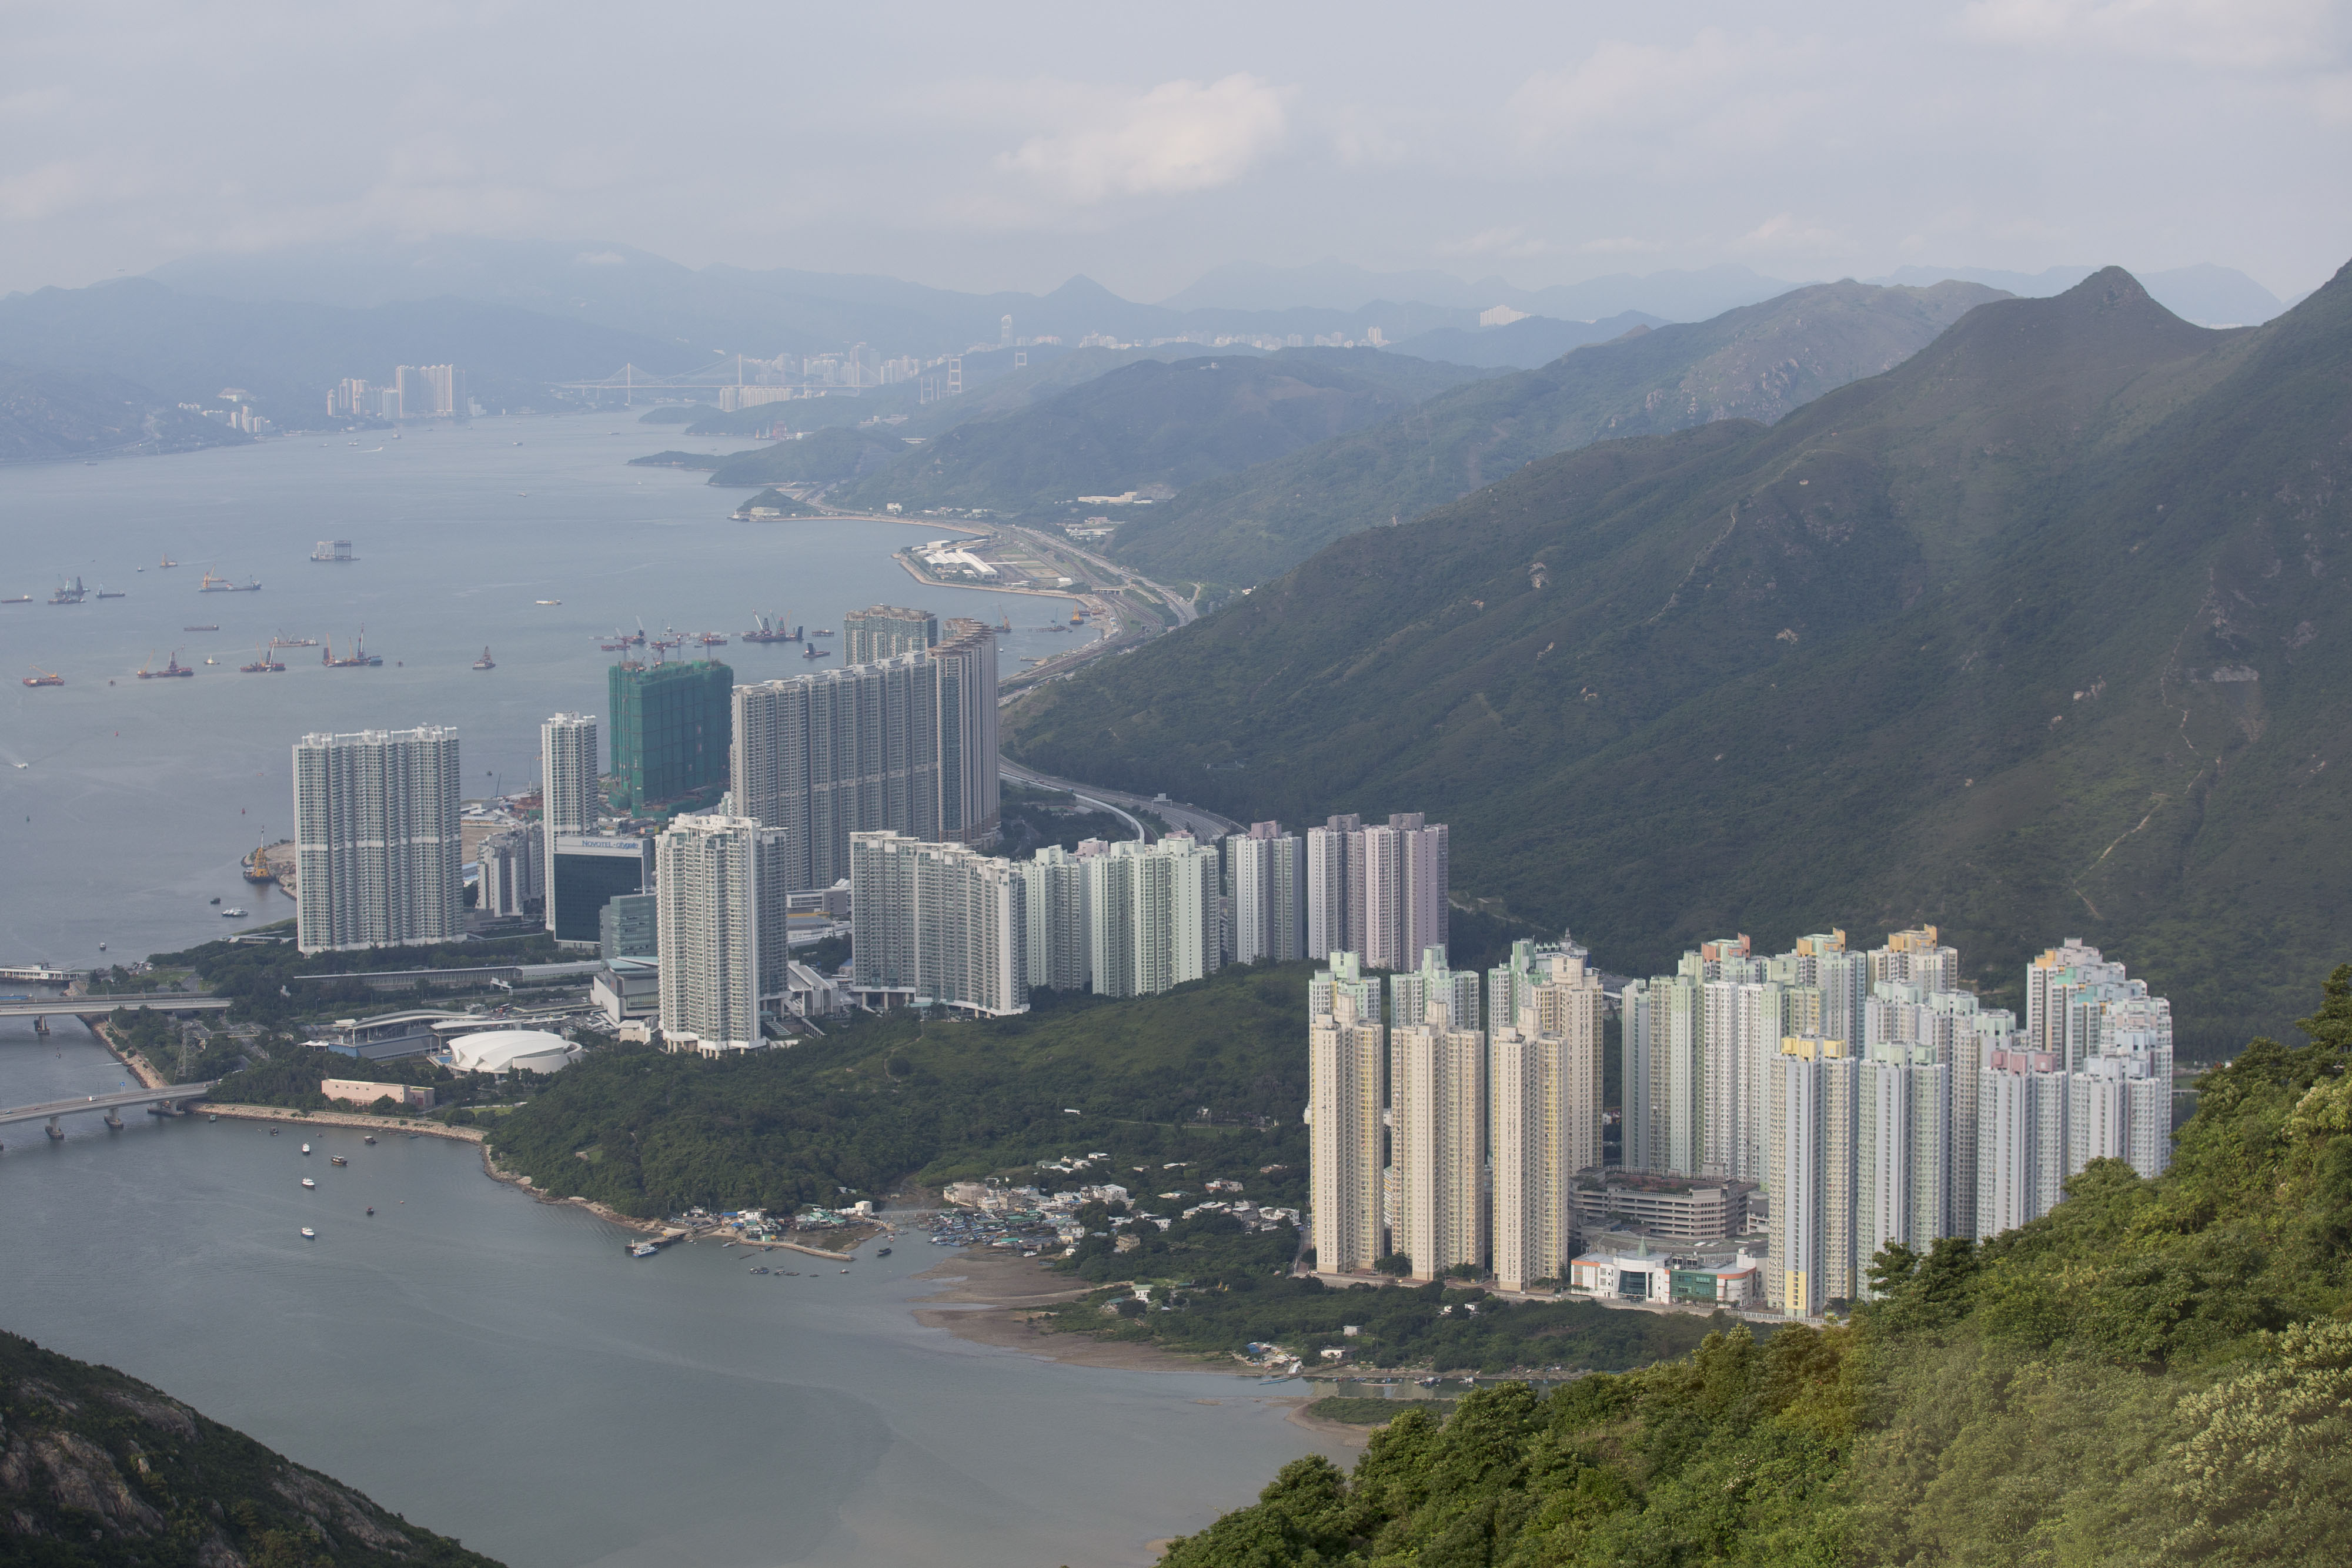 The government must carry out more studies on local air pollution if it is to convince the public that further expansion of Tung Chung new town will not pose a risk to health, a green group says. Photo: Bloomberg